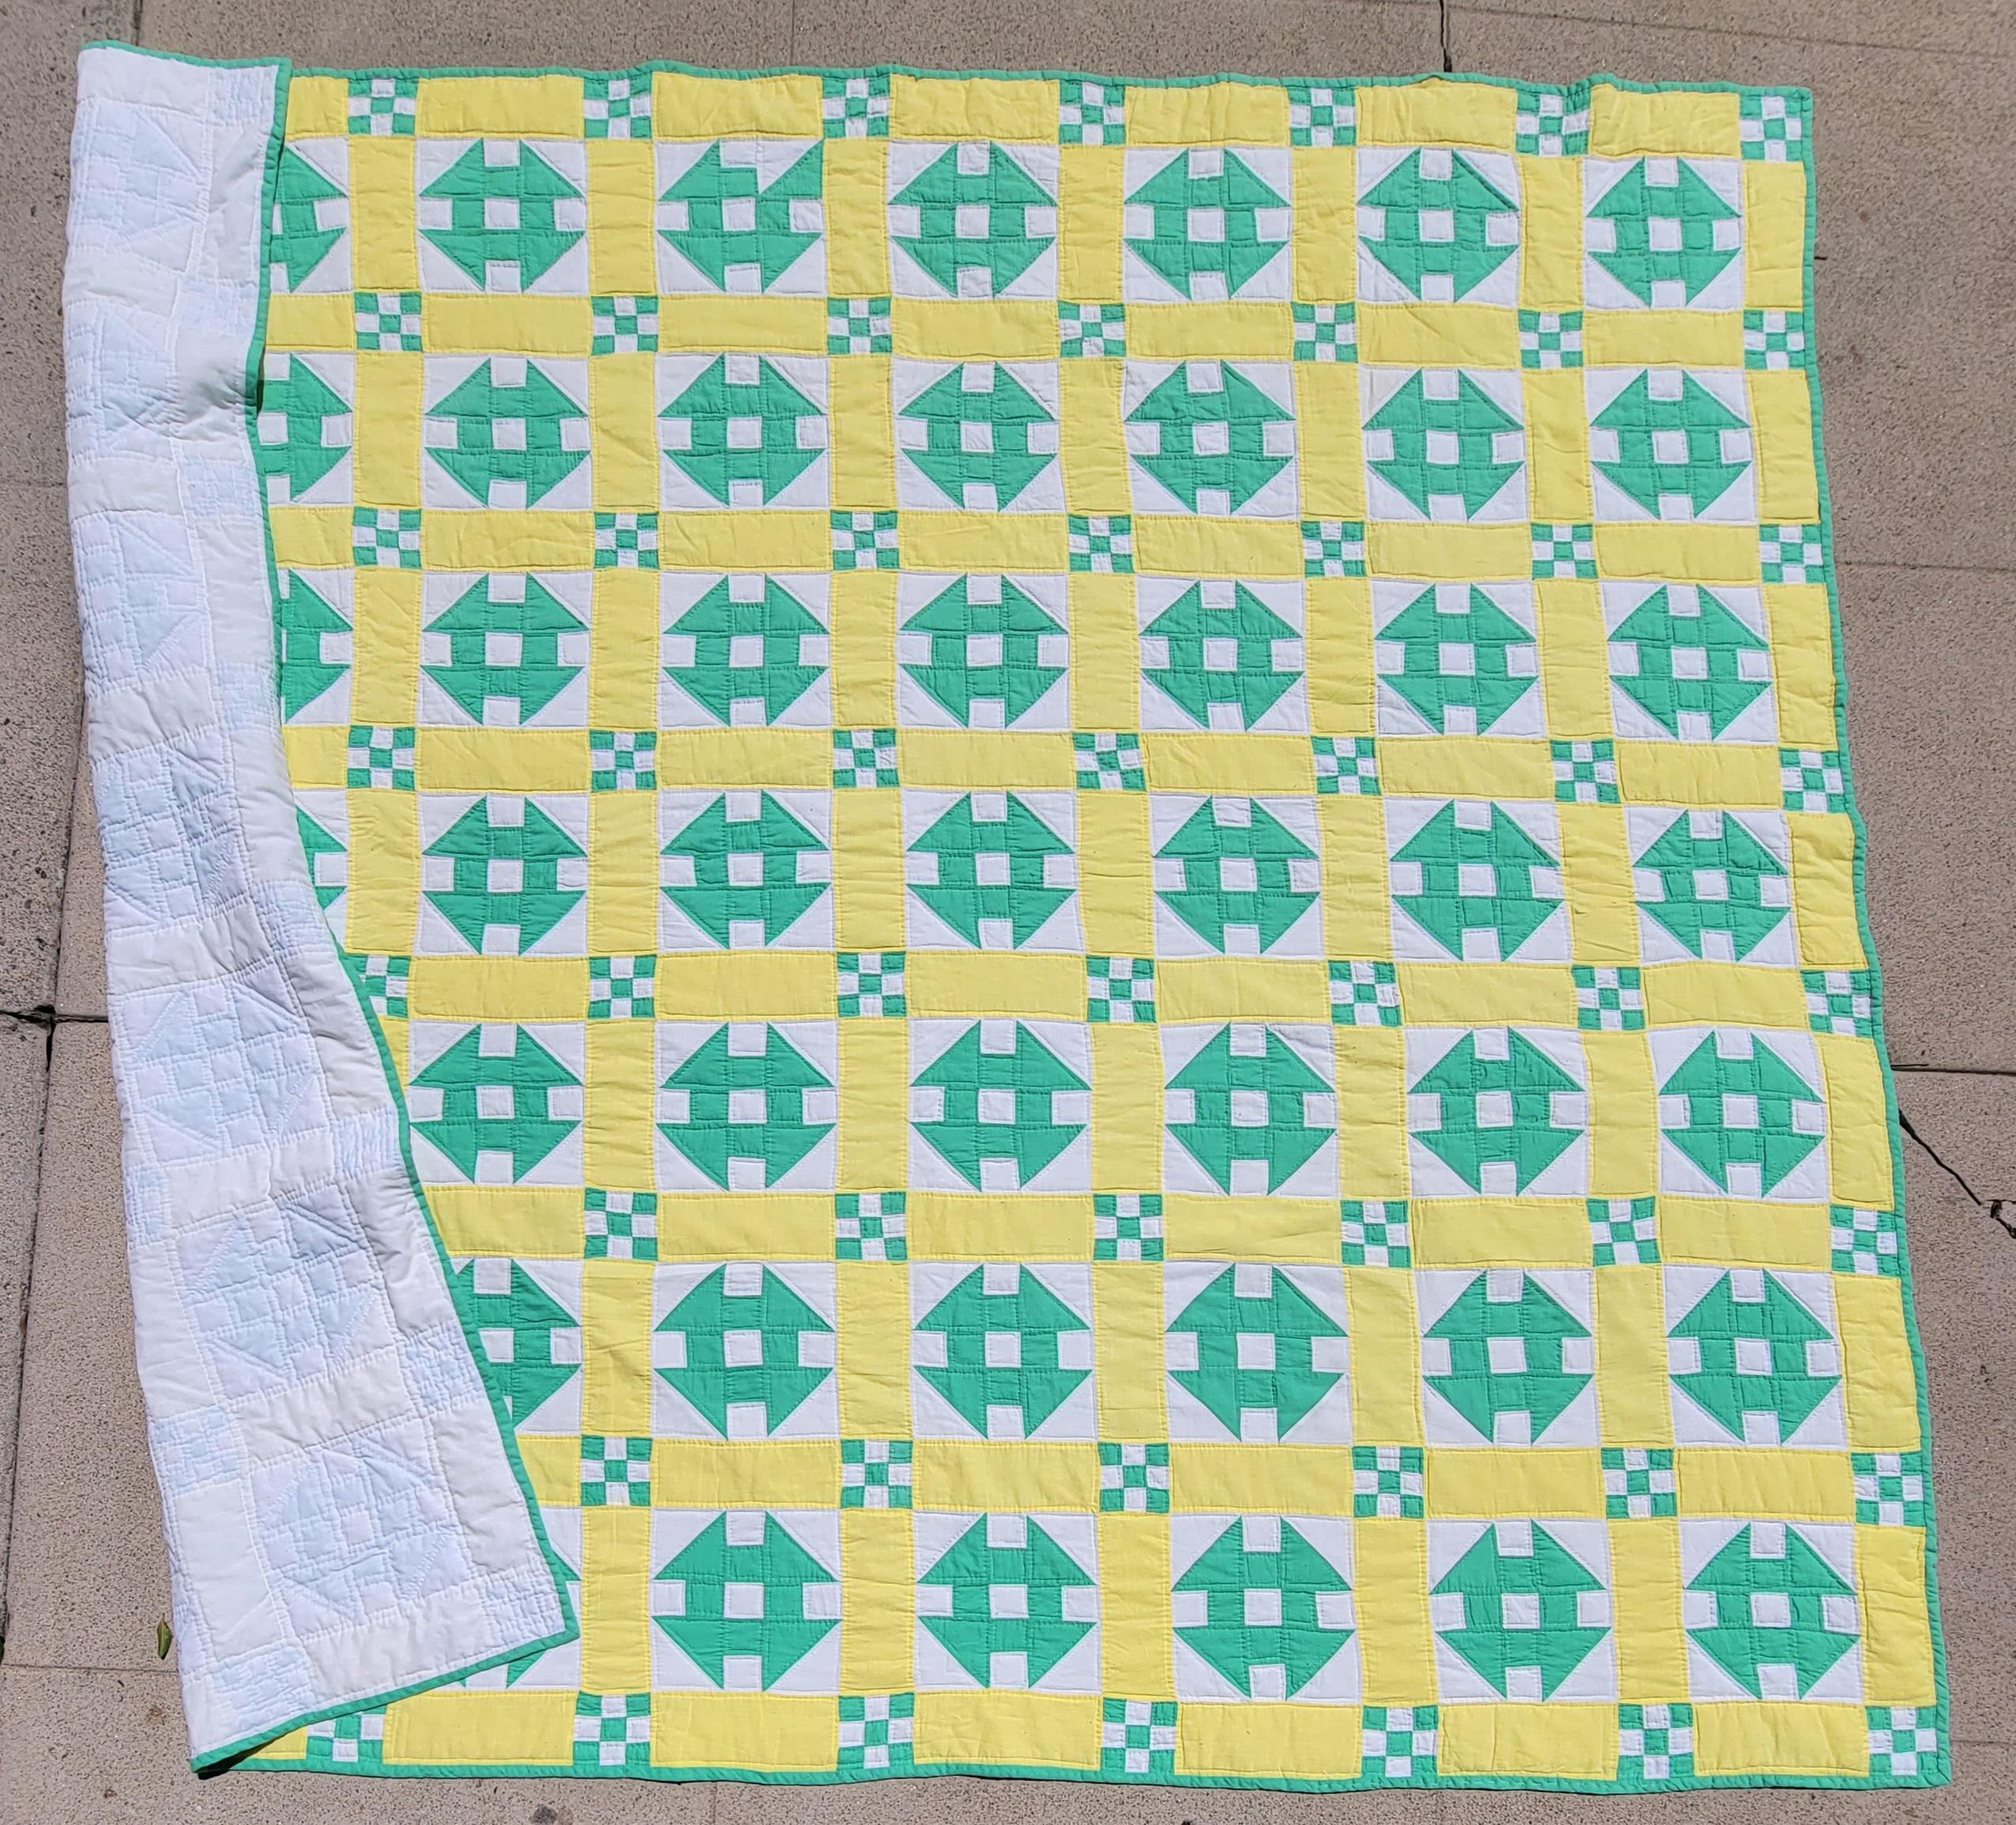 This fun hole in the barn door pattern quilt is in butter cup yellow and mint green colors.The condition is very good and mint.These fun spring colors are really wonderful.Notice the nine patch corners that flank along the monkey wrench or hole in